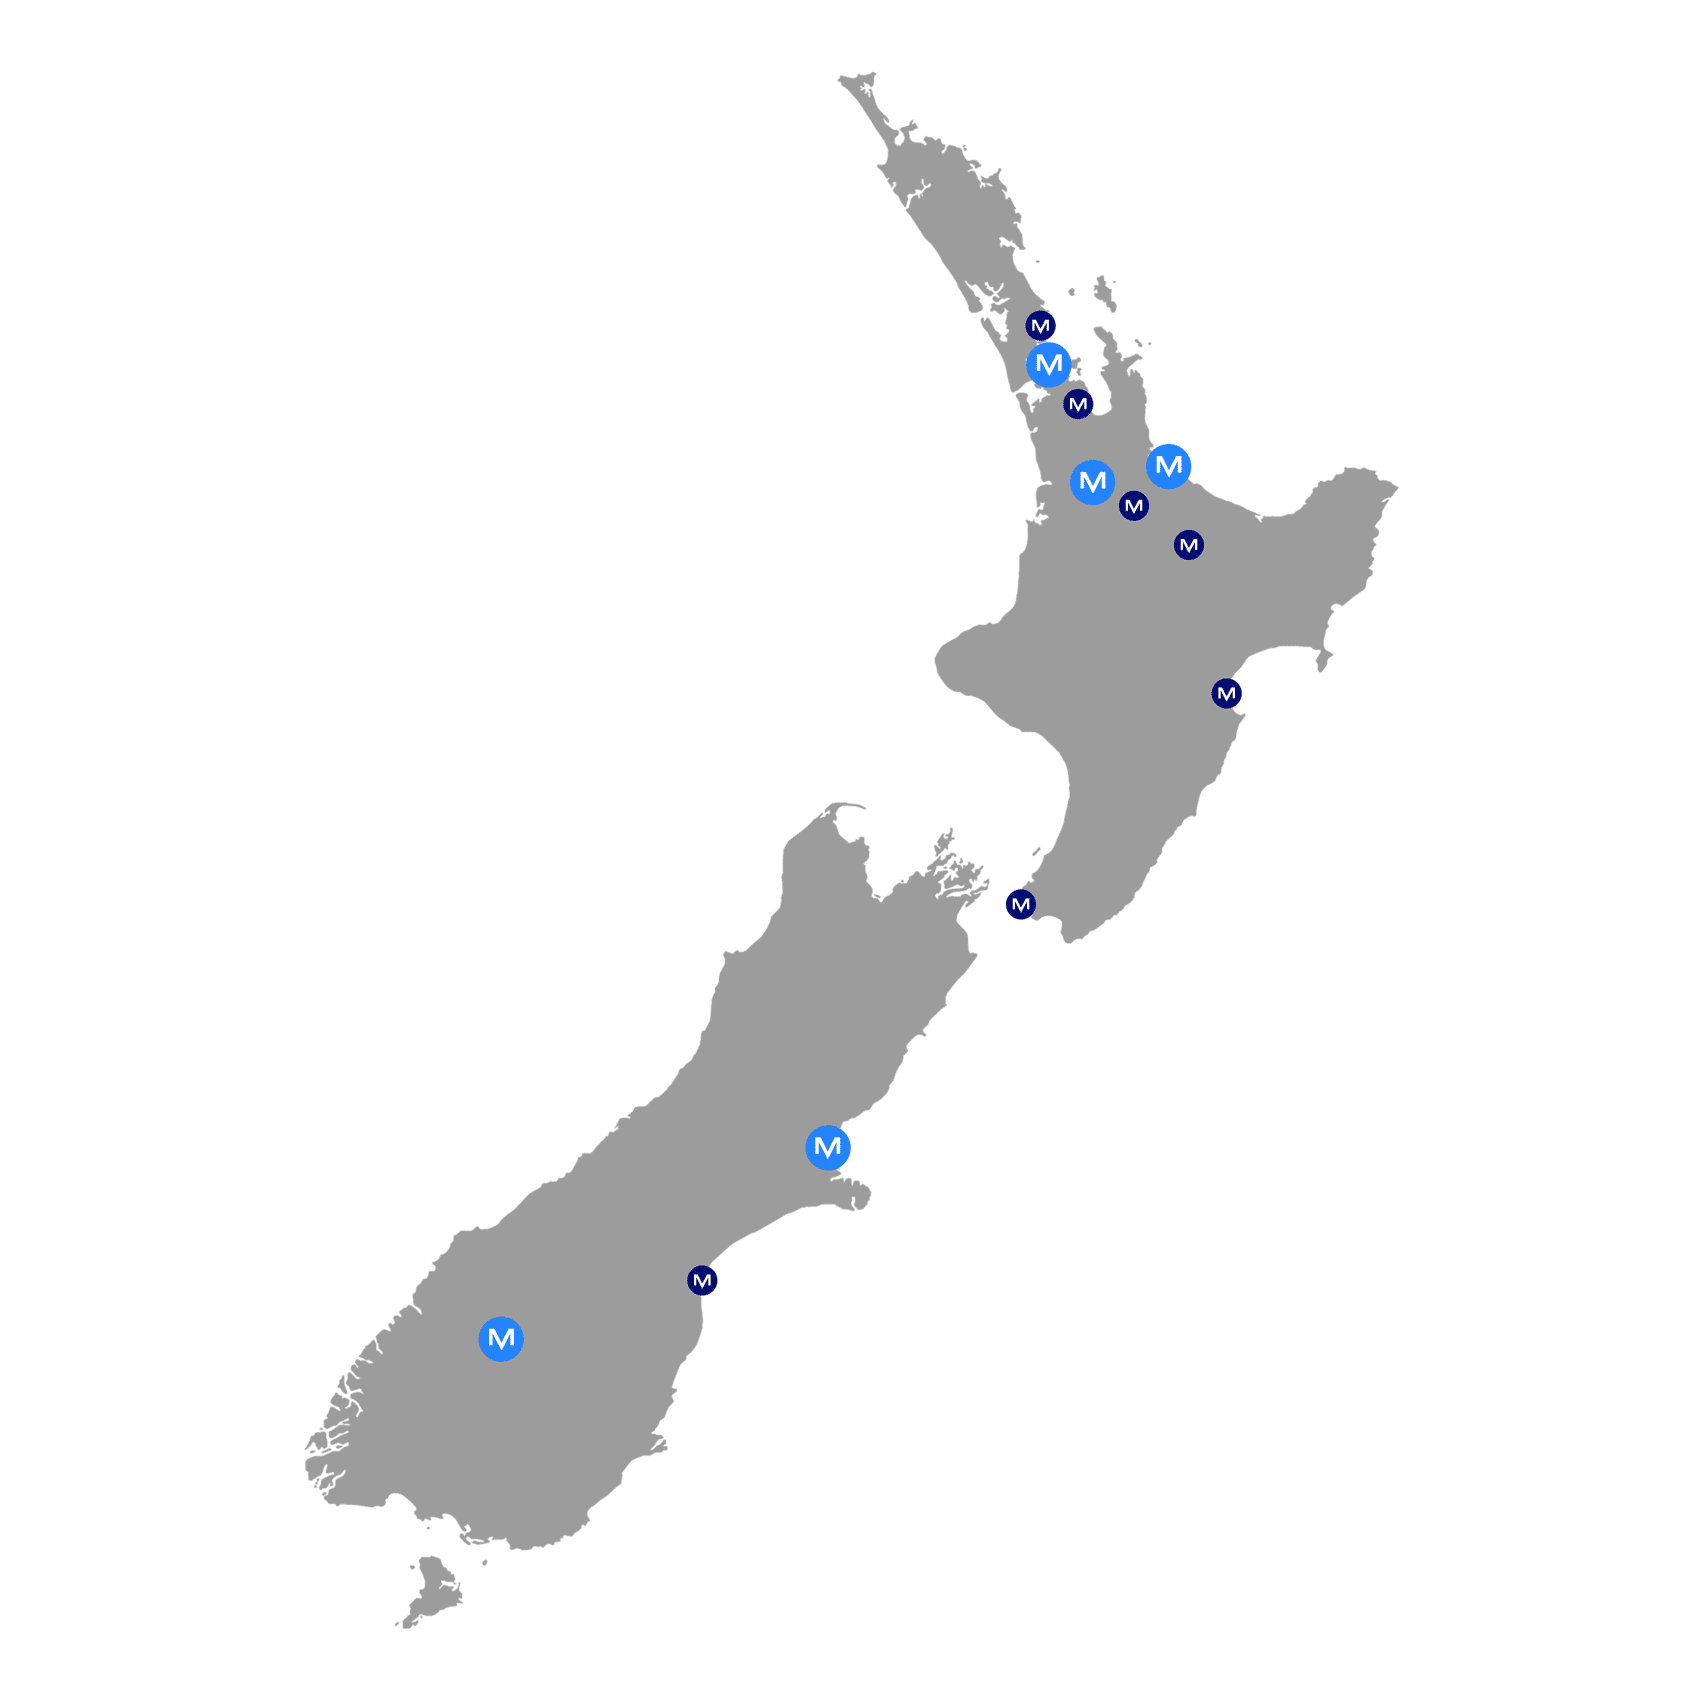 Illustrated map of New Zealand, with blue dots showing the locations of Maven offices